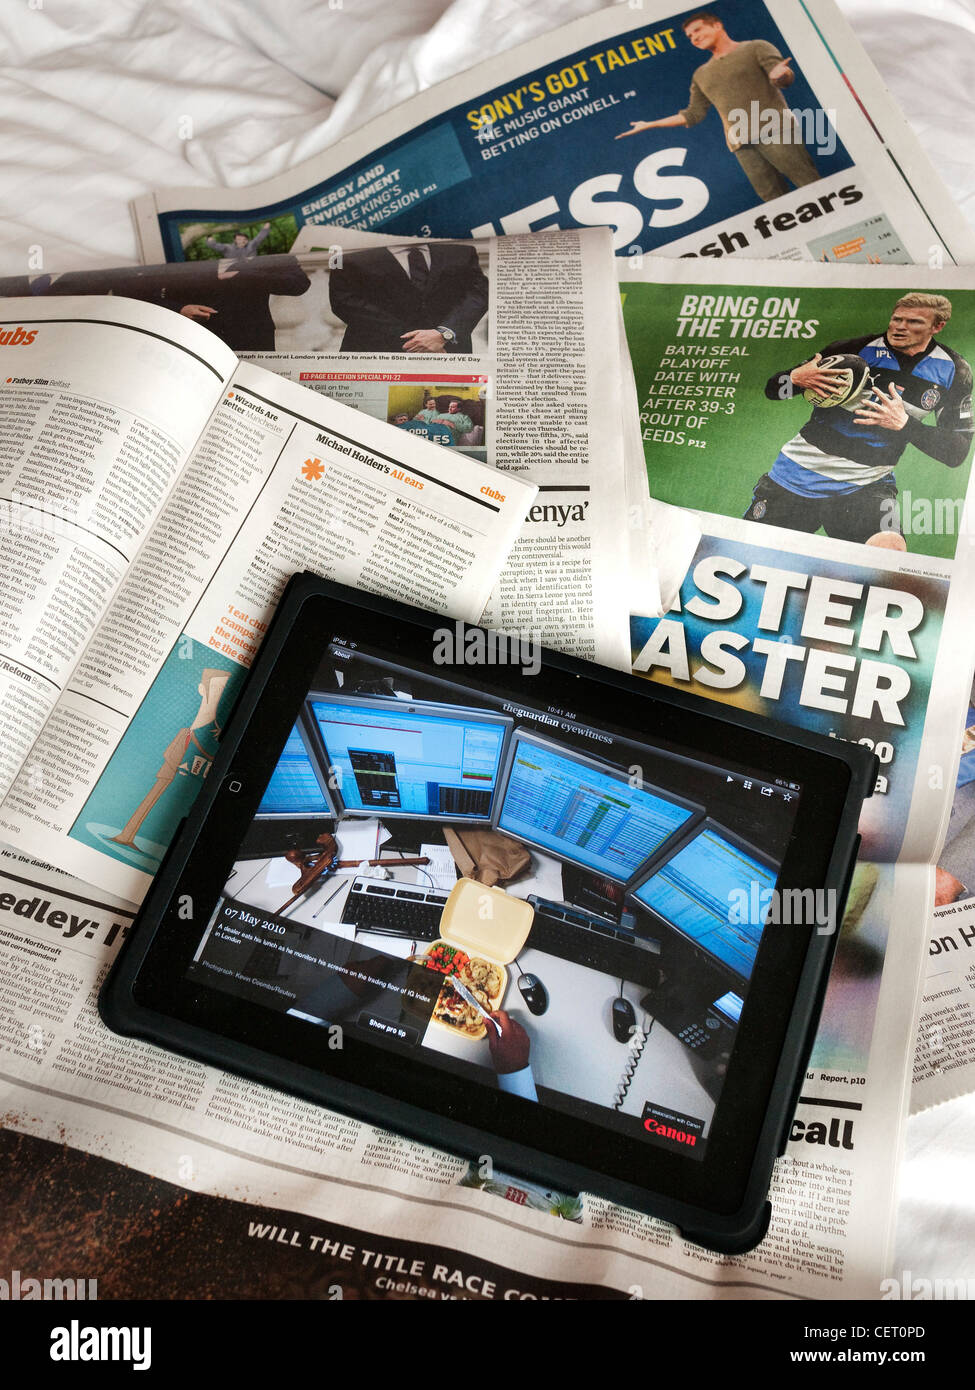 Apple iPad with sunday papers Stock Photo